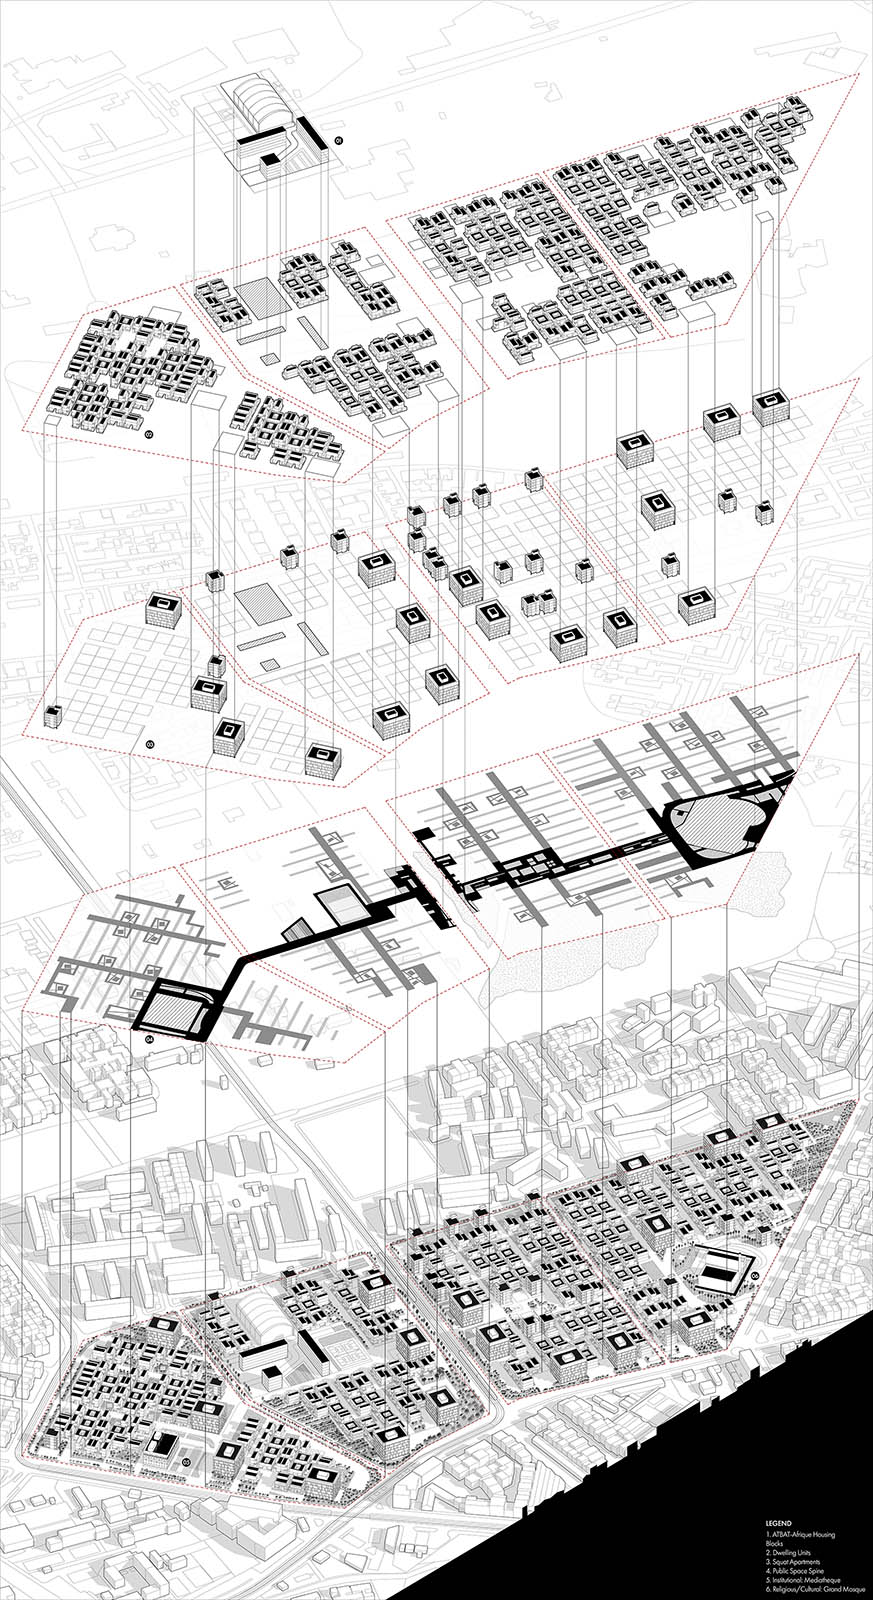 A black and white graphic showing different layers of the project. On top we see public space corridor, the next layer shows squat apartments in a form of boxes, below we see residential layer with a grid of lines and the bottom layer shows existing slabs.